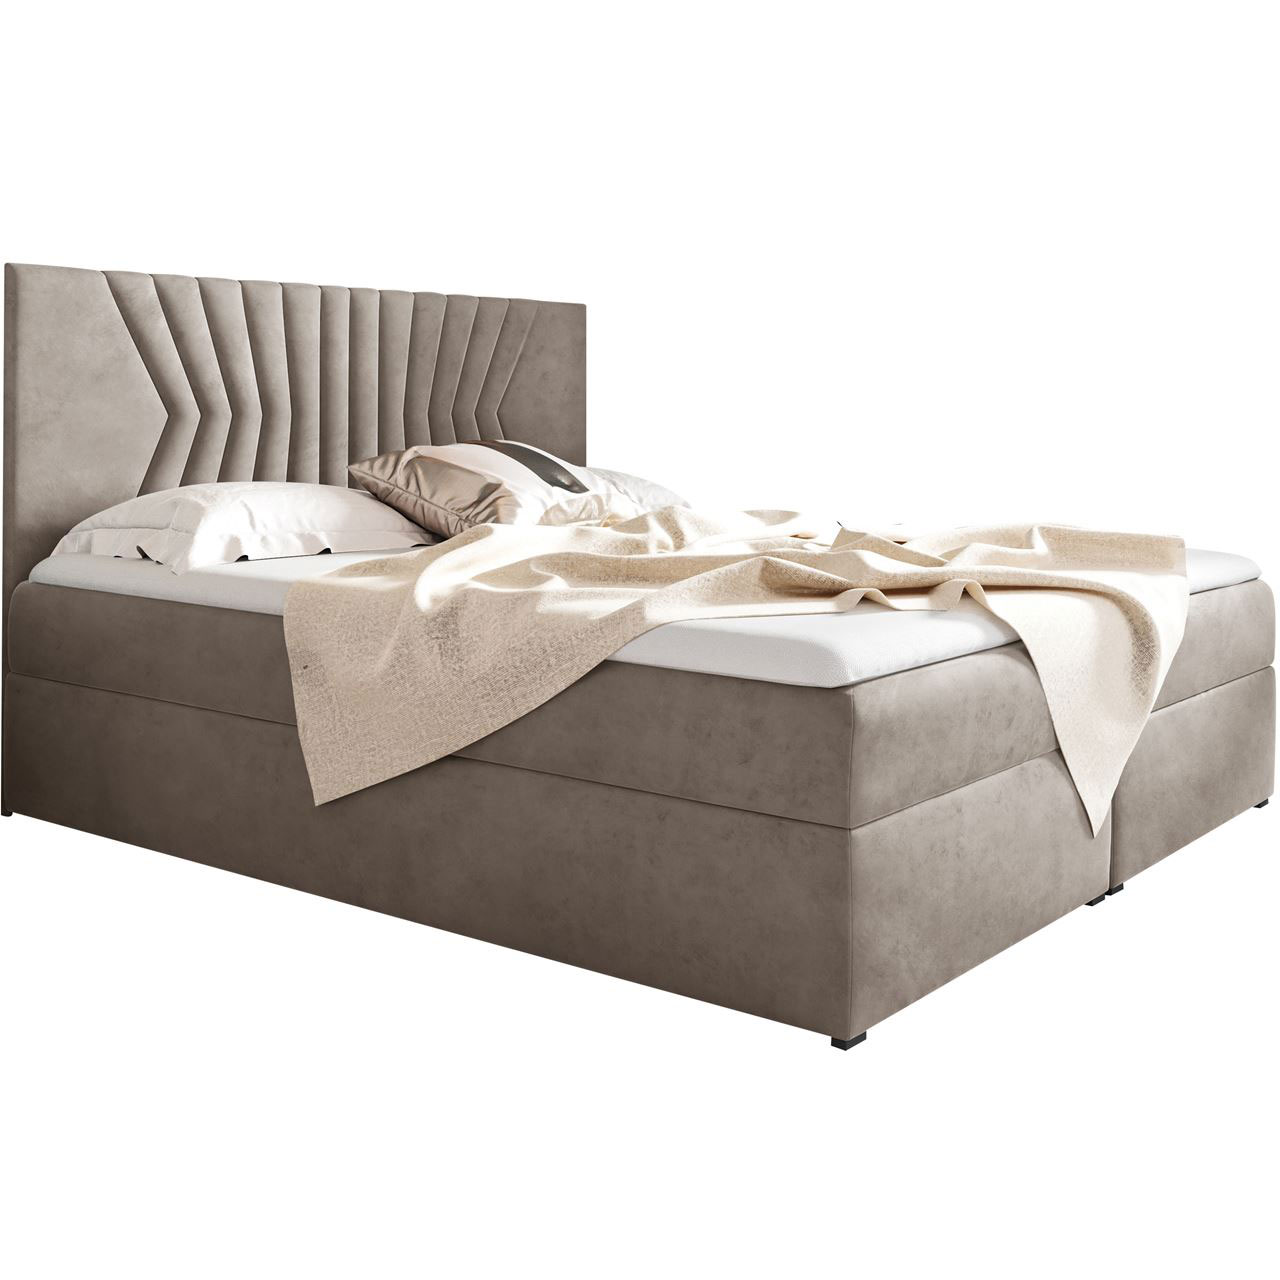 Upholstered bed ASTRO 160x200 fresh 02